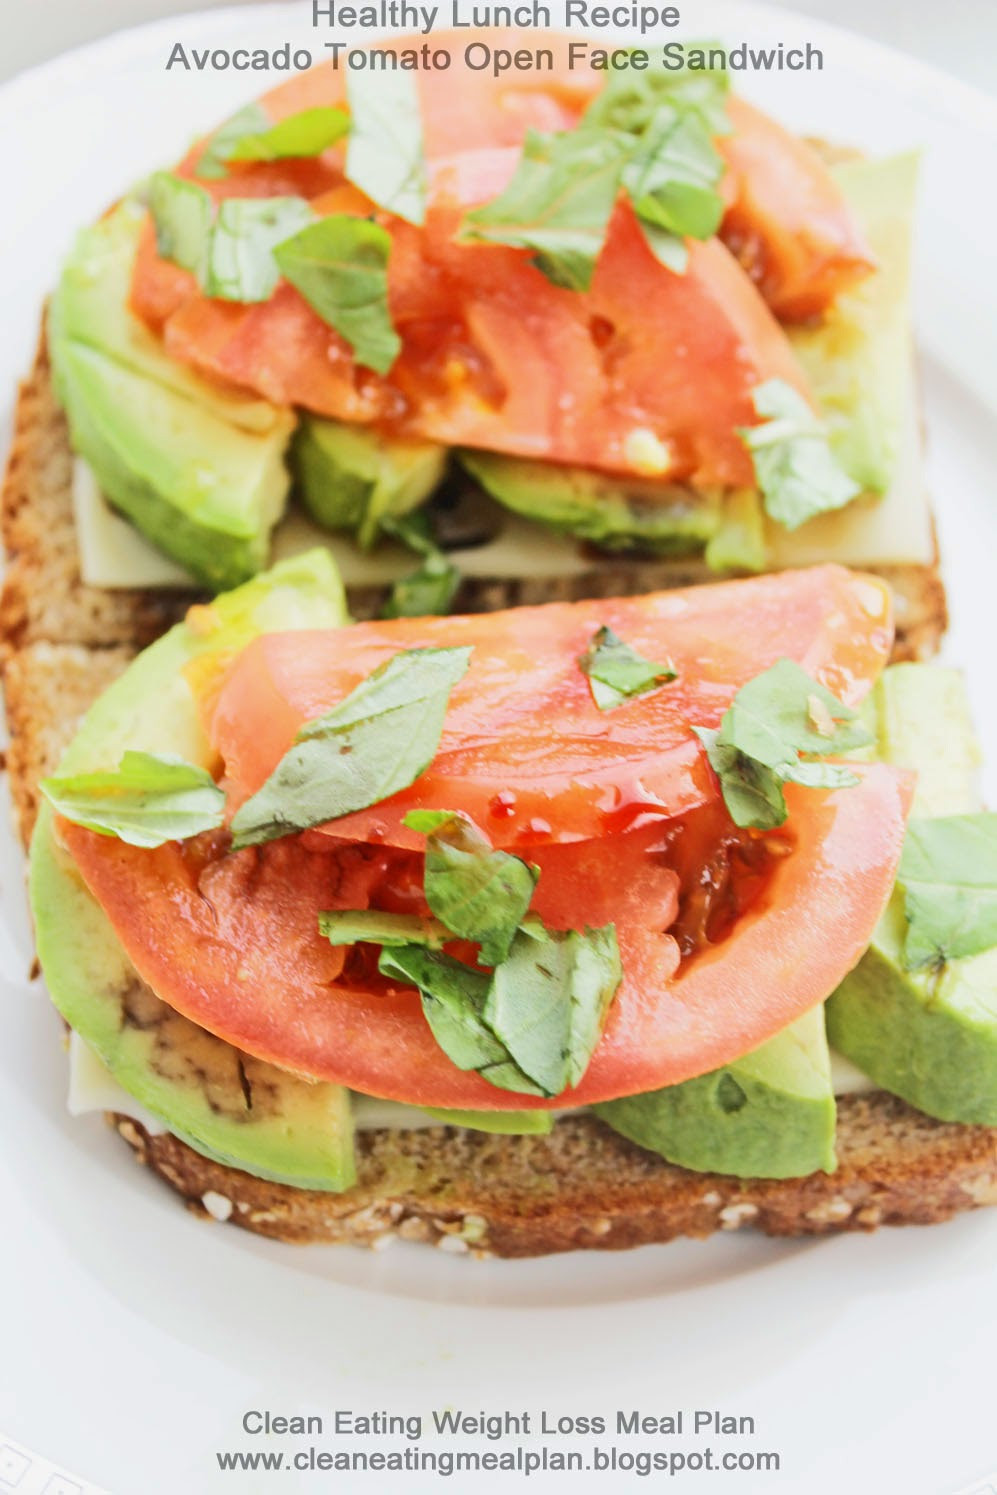 Healthy Sandwich Recipes For Weight Loss
 Healthy Lunch Recipe Avocado Tomato Open Face Sandwich